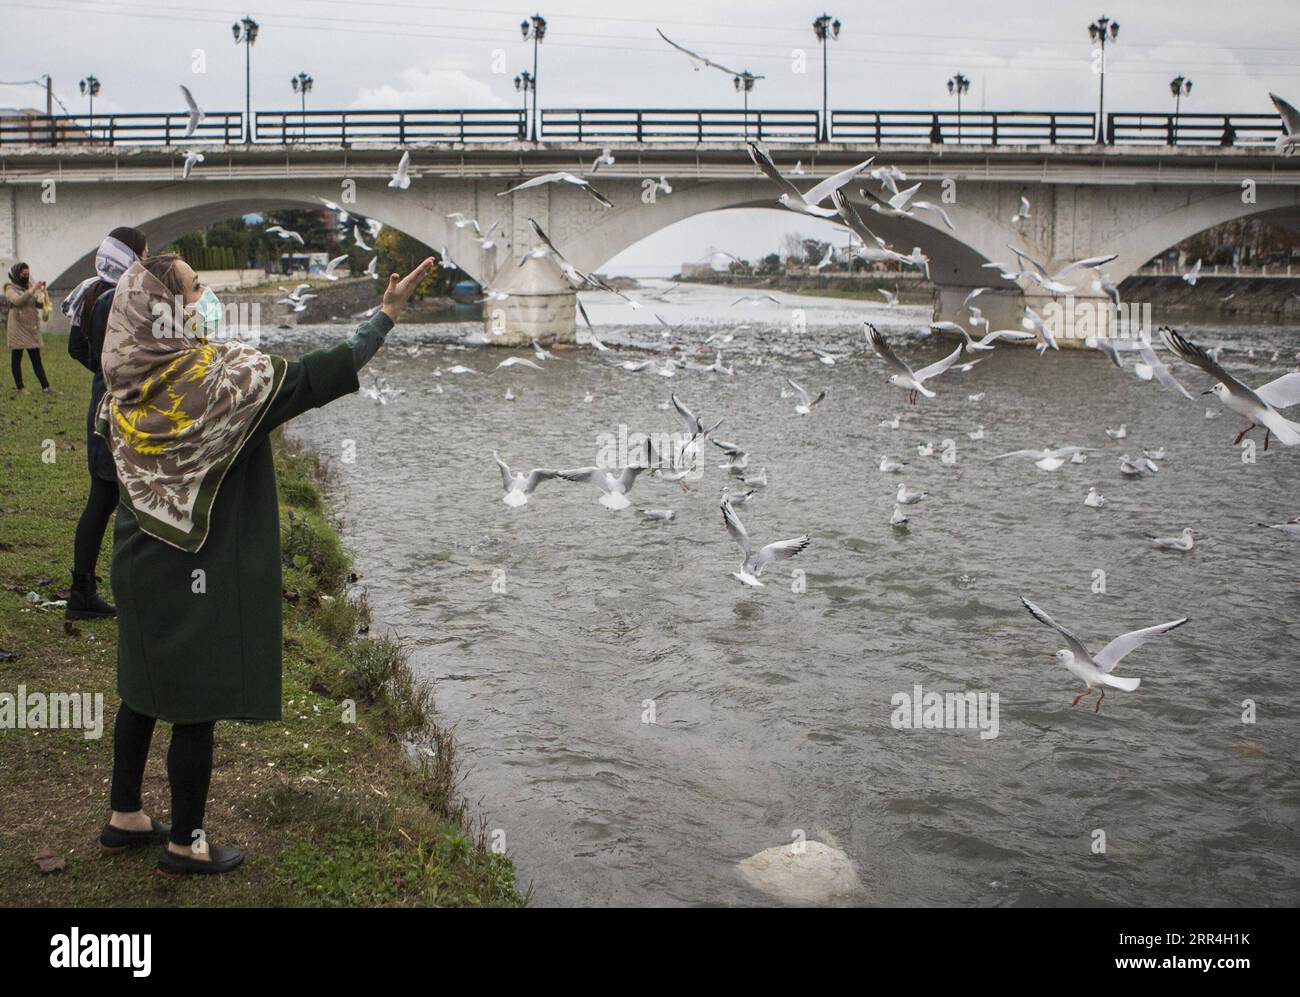 201204 -- TONEKABON, Dec. 4, 2020 -- A woman wearing a face mask feeds birds by a river in Tonekabon, northern Iran, Dec. 3, 2020. Iran s Health Ministry on Friday reported 347 new COVID-19 death cases in the past 24 hours, raising the death toll to 49,695 since the outbreak of the disease in the country on Feb. 19. Photo by /Xinhua IRAN-TONEKABON-COVID-19-CASES AhmadxHalabisaz PUBLICATIONxNOTxINxCHN Stock Photo